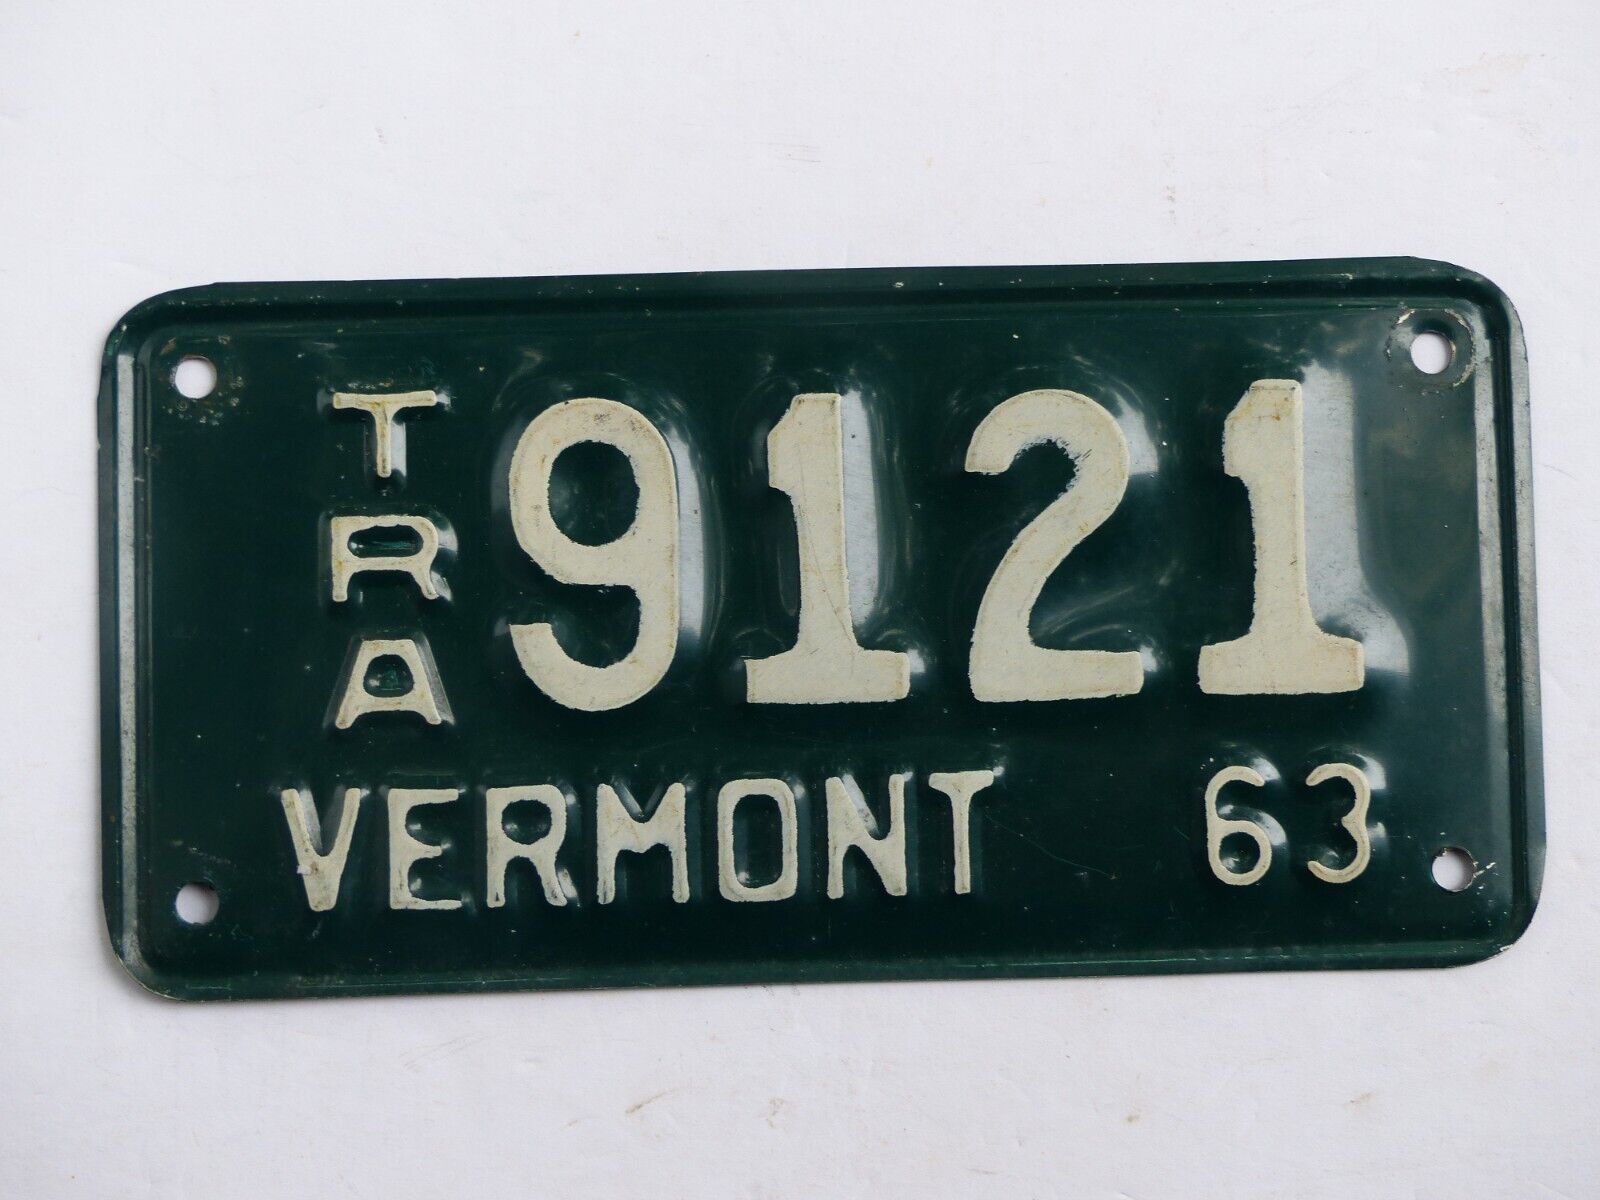 Used 63 1963 Vermont Trailer Small Size License Plate # TRA 9121 White on Green